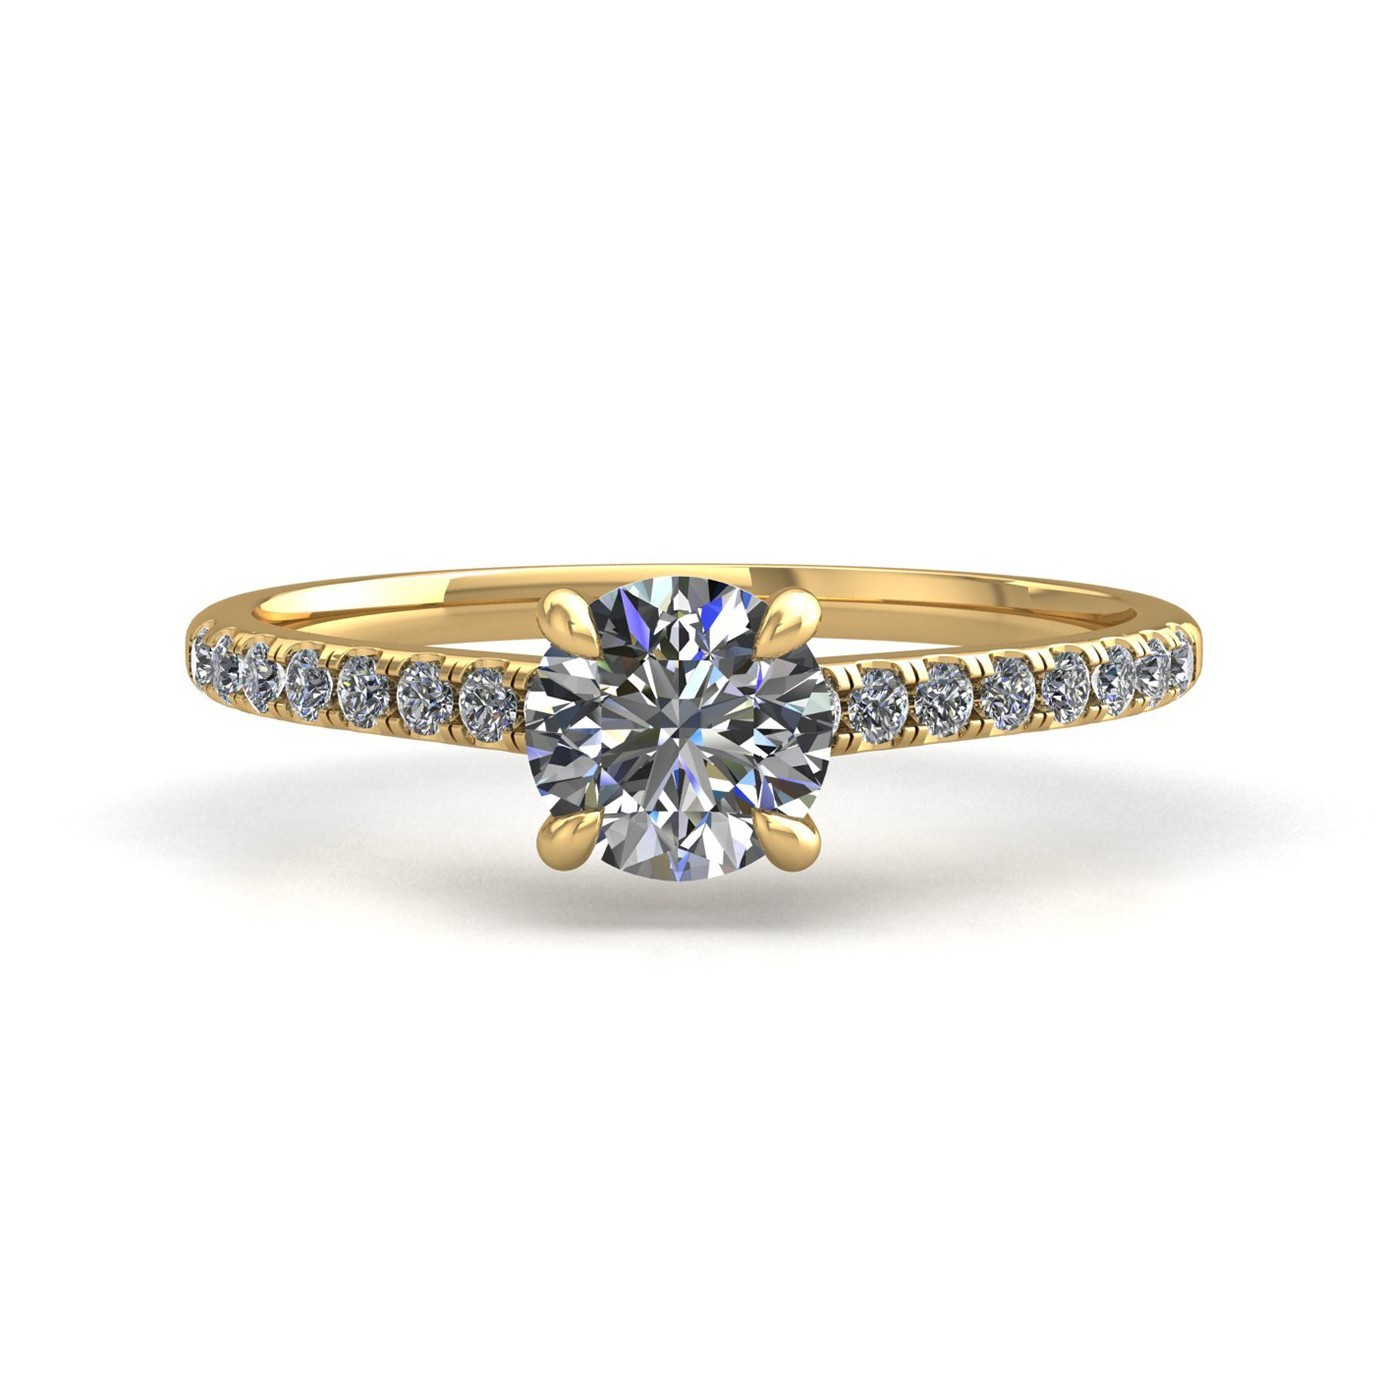 18k yellow gold 0,50 ct 4 prongs round cut diamond engagement ring with whisper thin pavÉ set band Photos & images